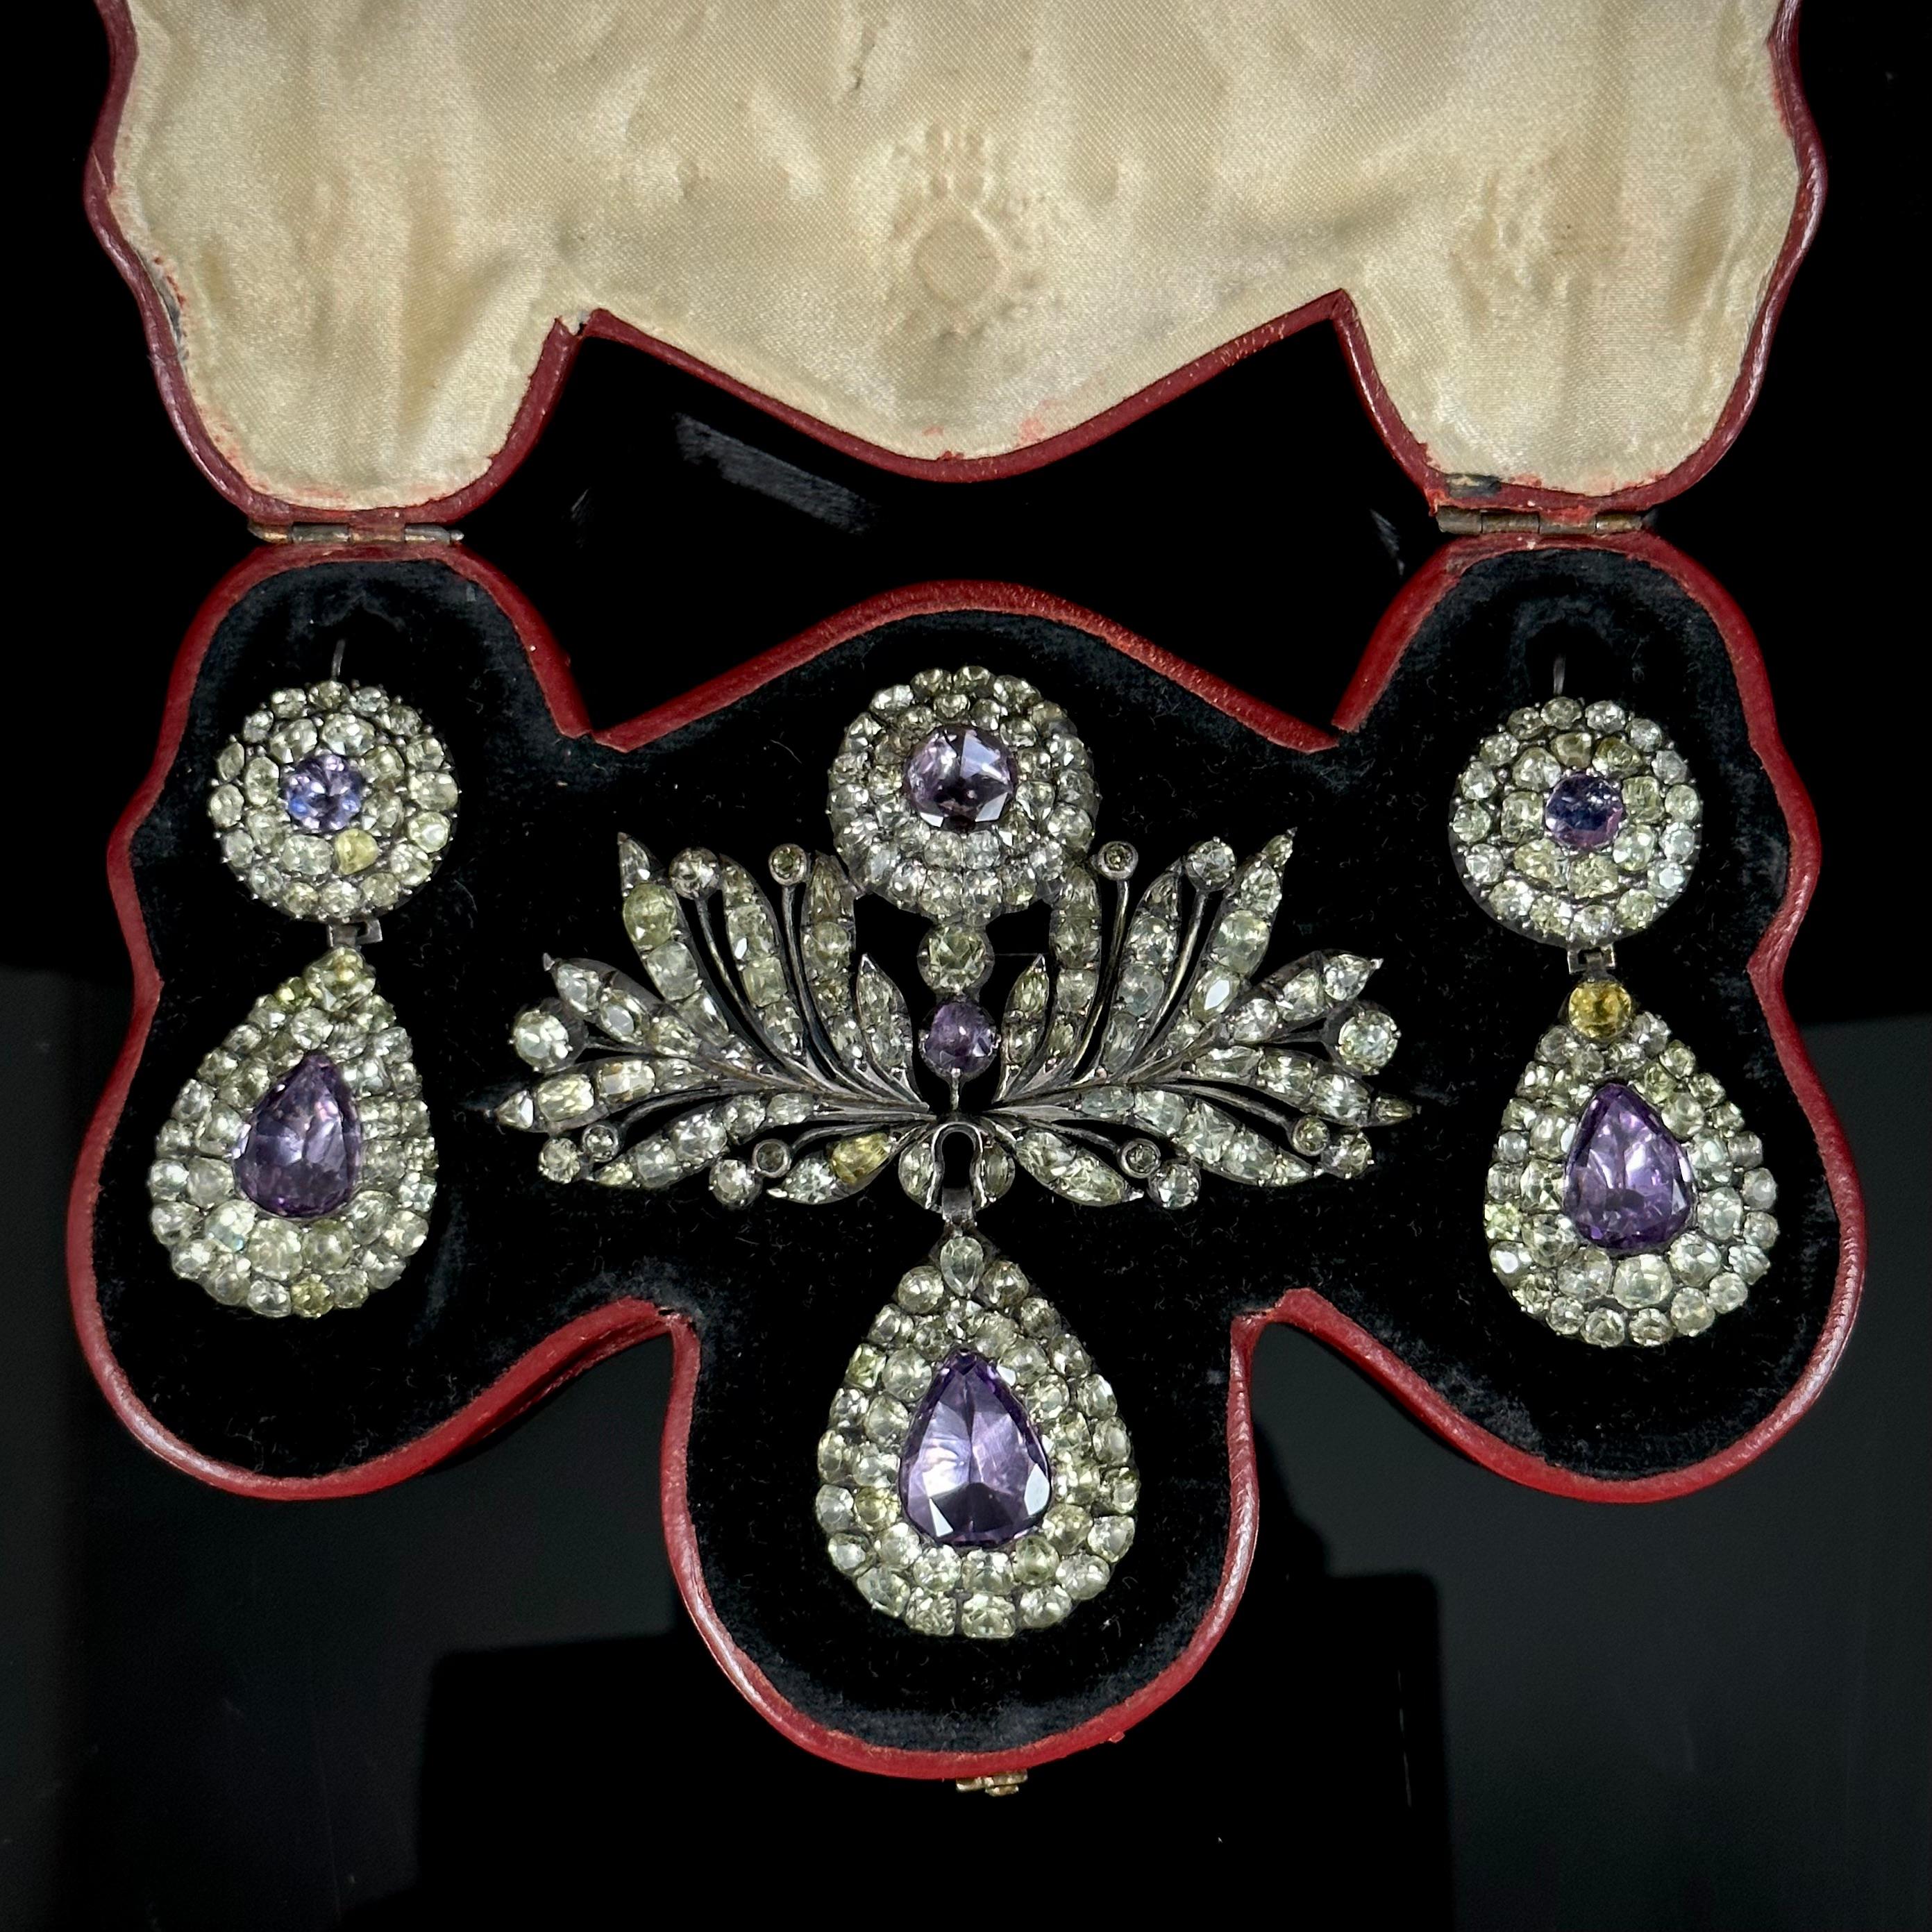 Antique Chrysolite Chrysoberyl Amethyst Brooch Earrings Silver Set Portuguese In Good Condition For Sale In Lisbon, PT